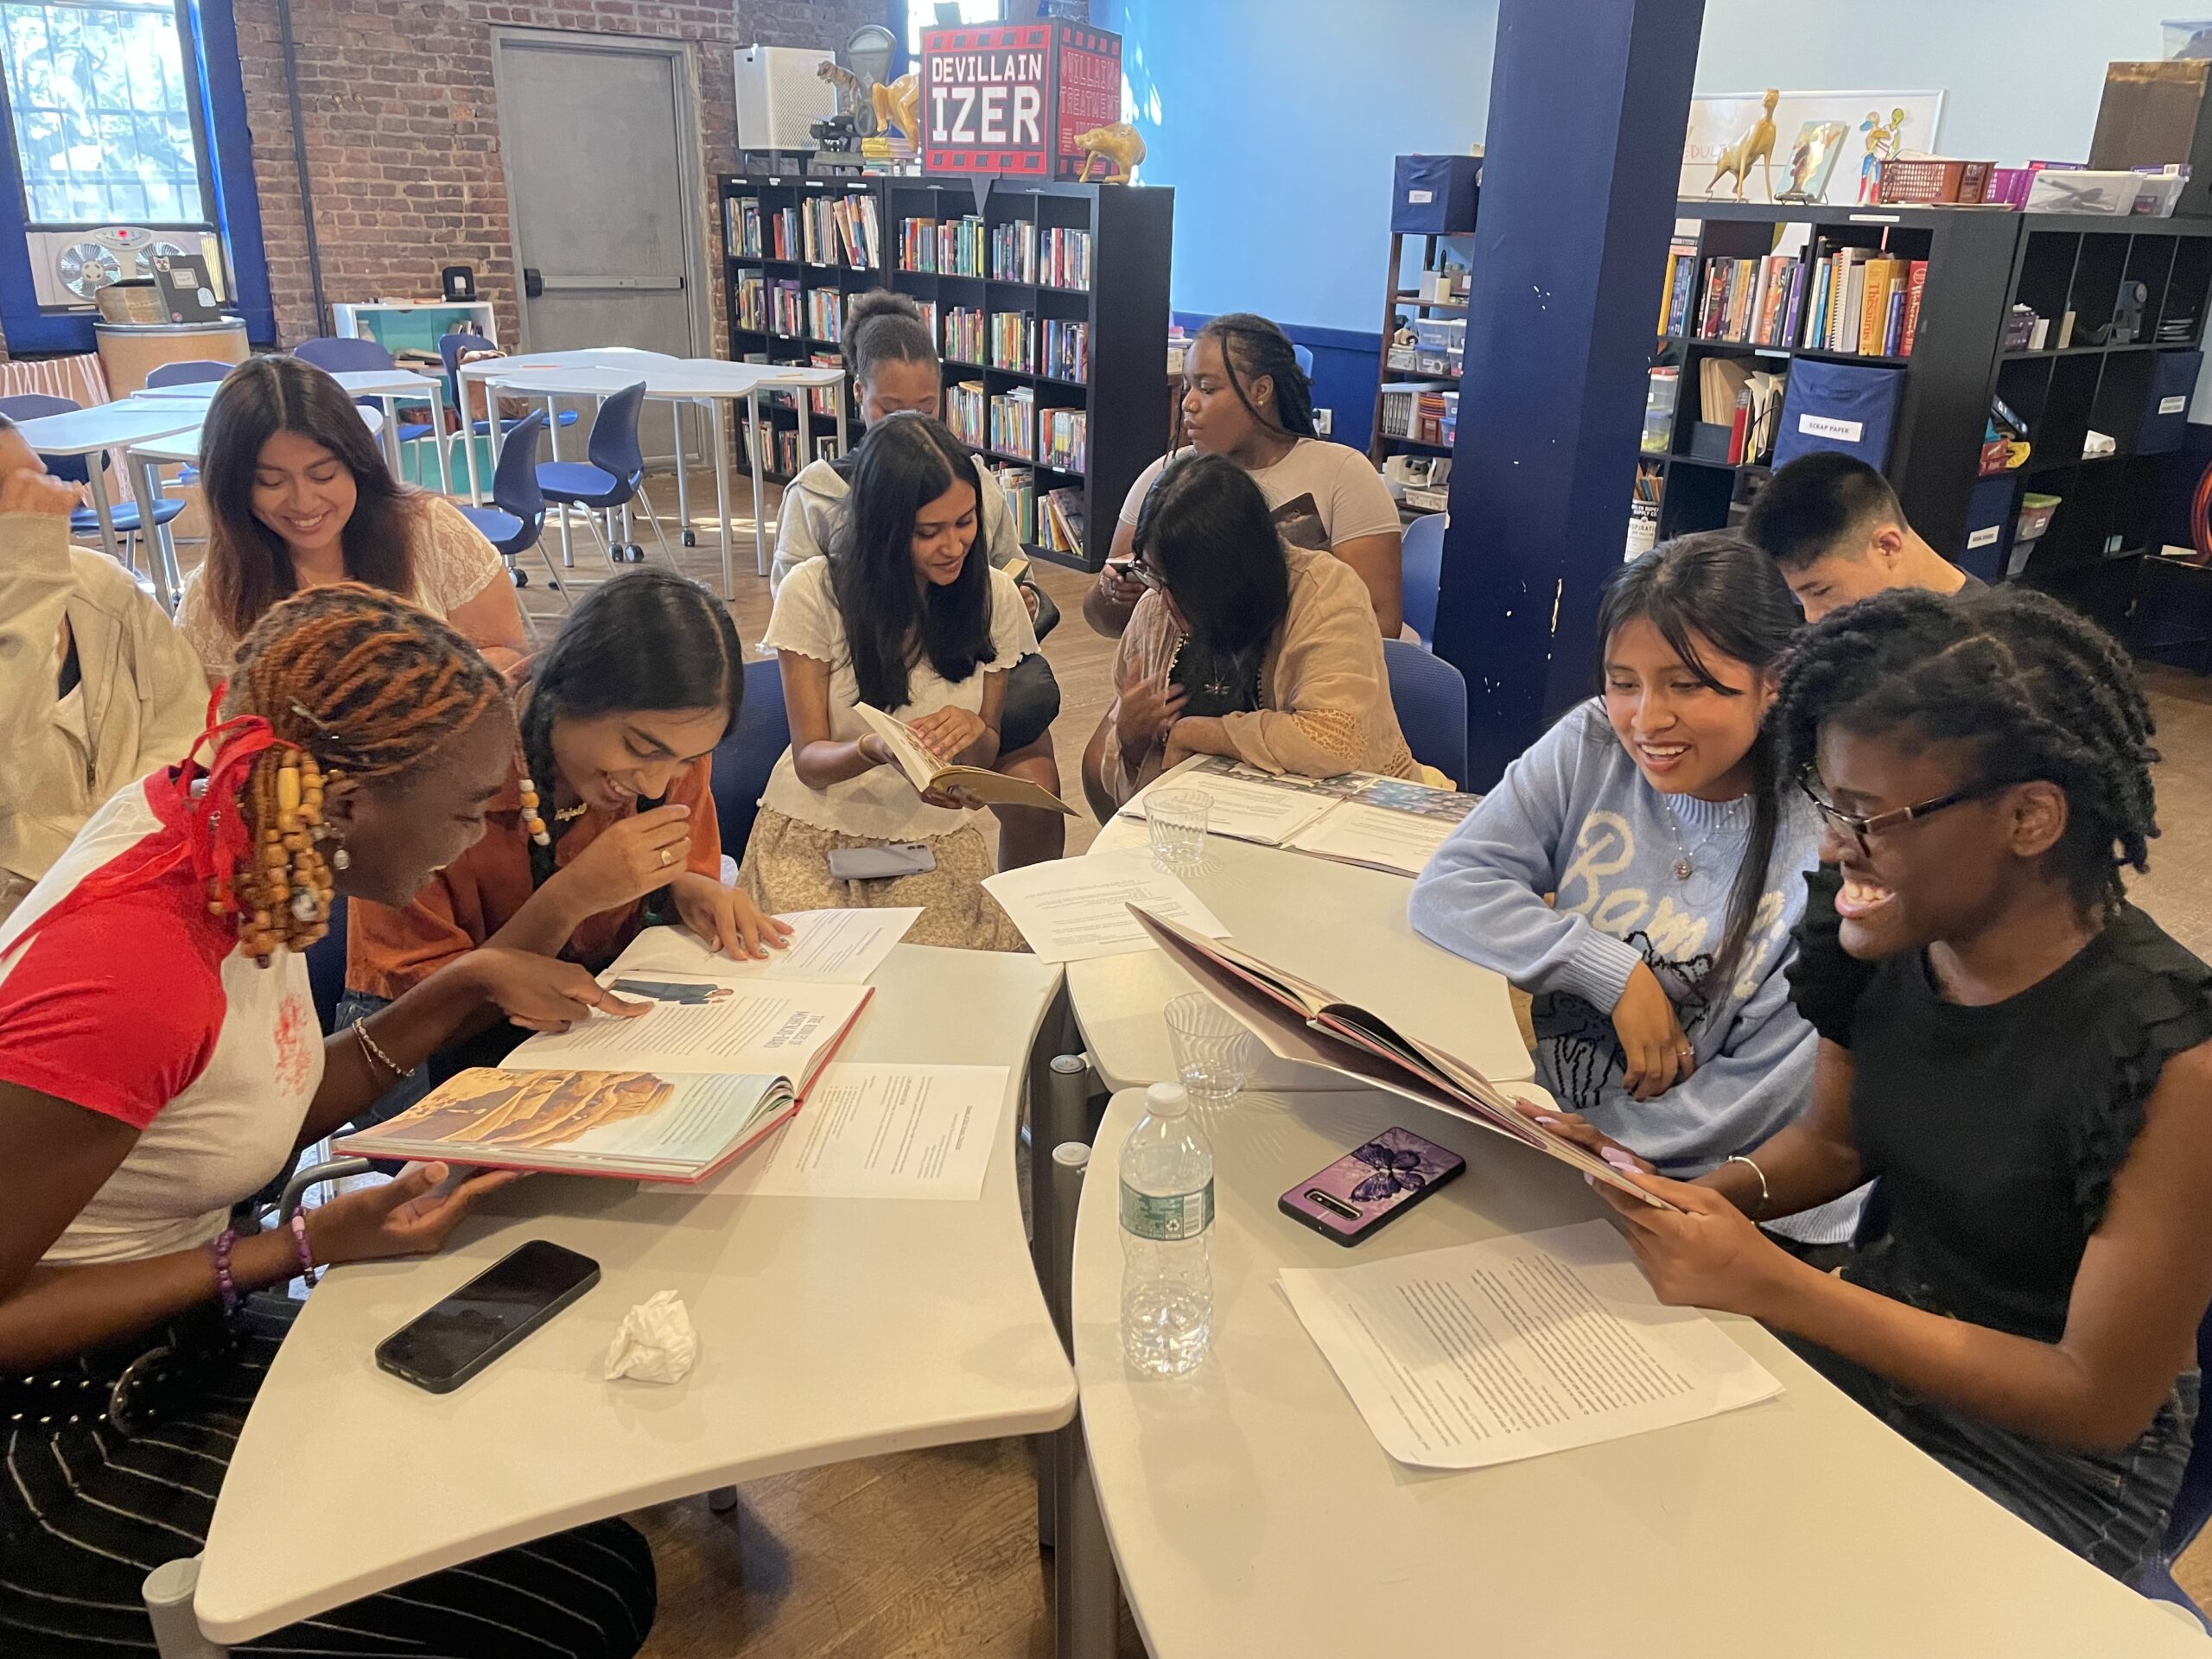 A group of teen writers sits at a cluster of tables happily reading and writing together.